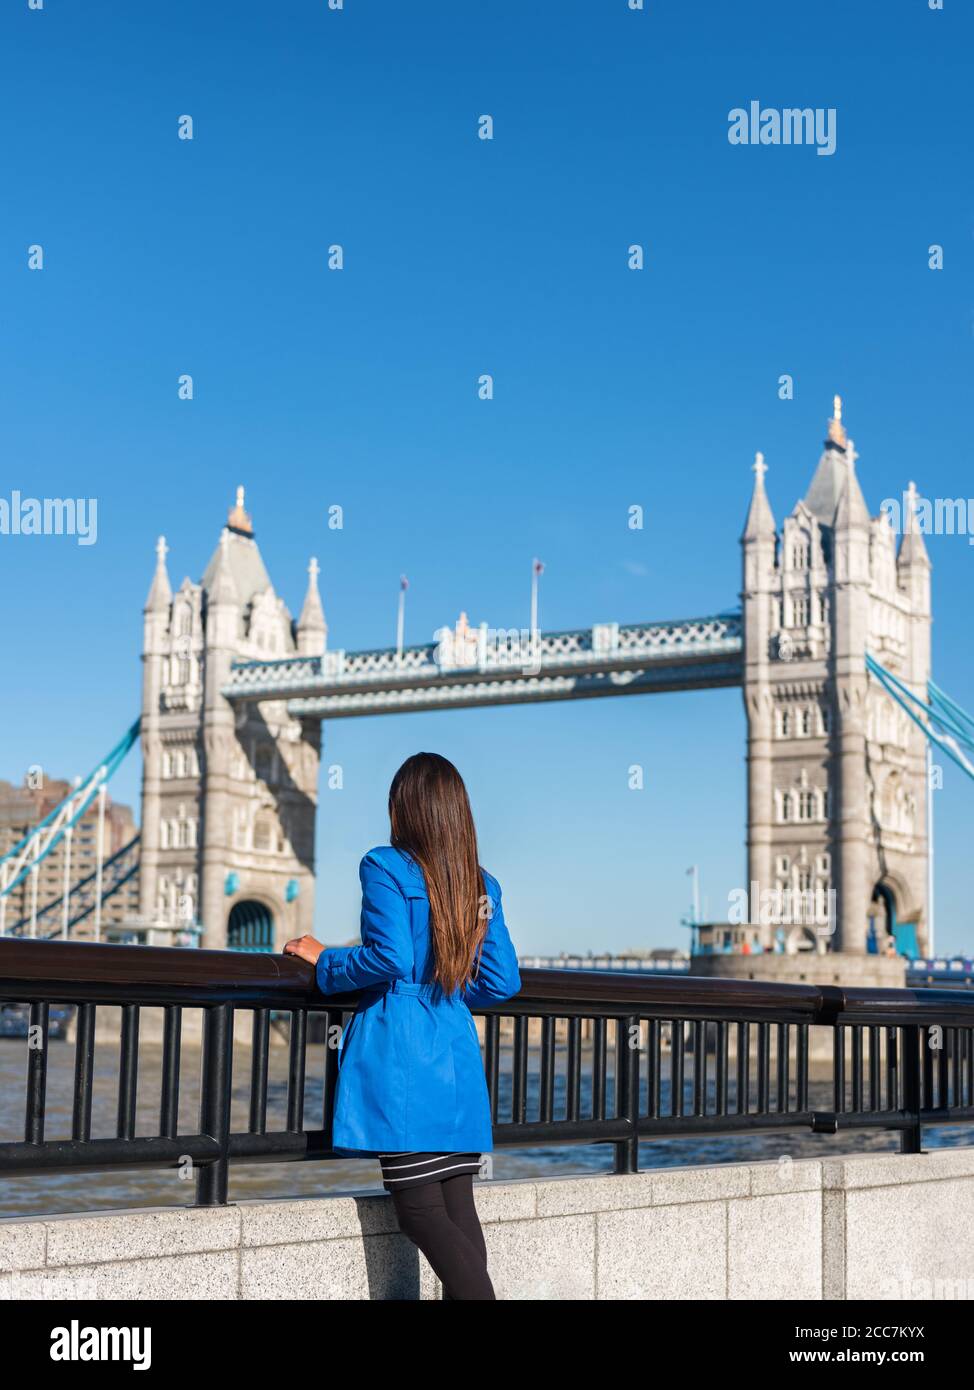 London people lifestyle city tourist woman looking at view of Tower bridge, young urban person in outerwear enjoying modern life Stock Photo